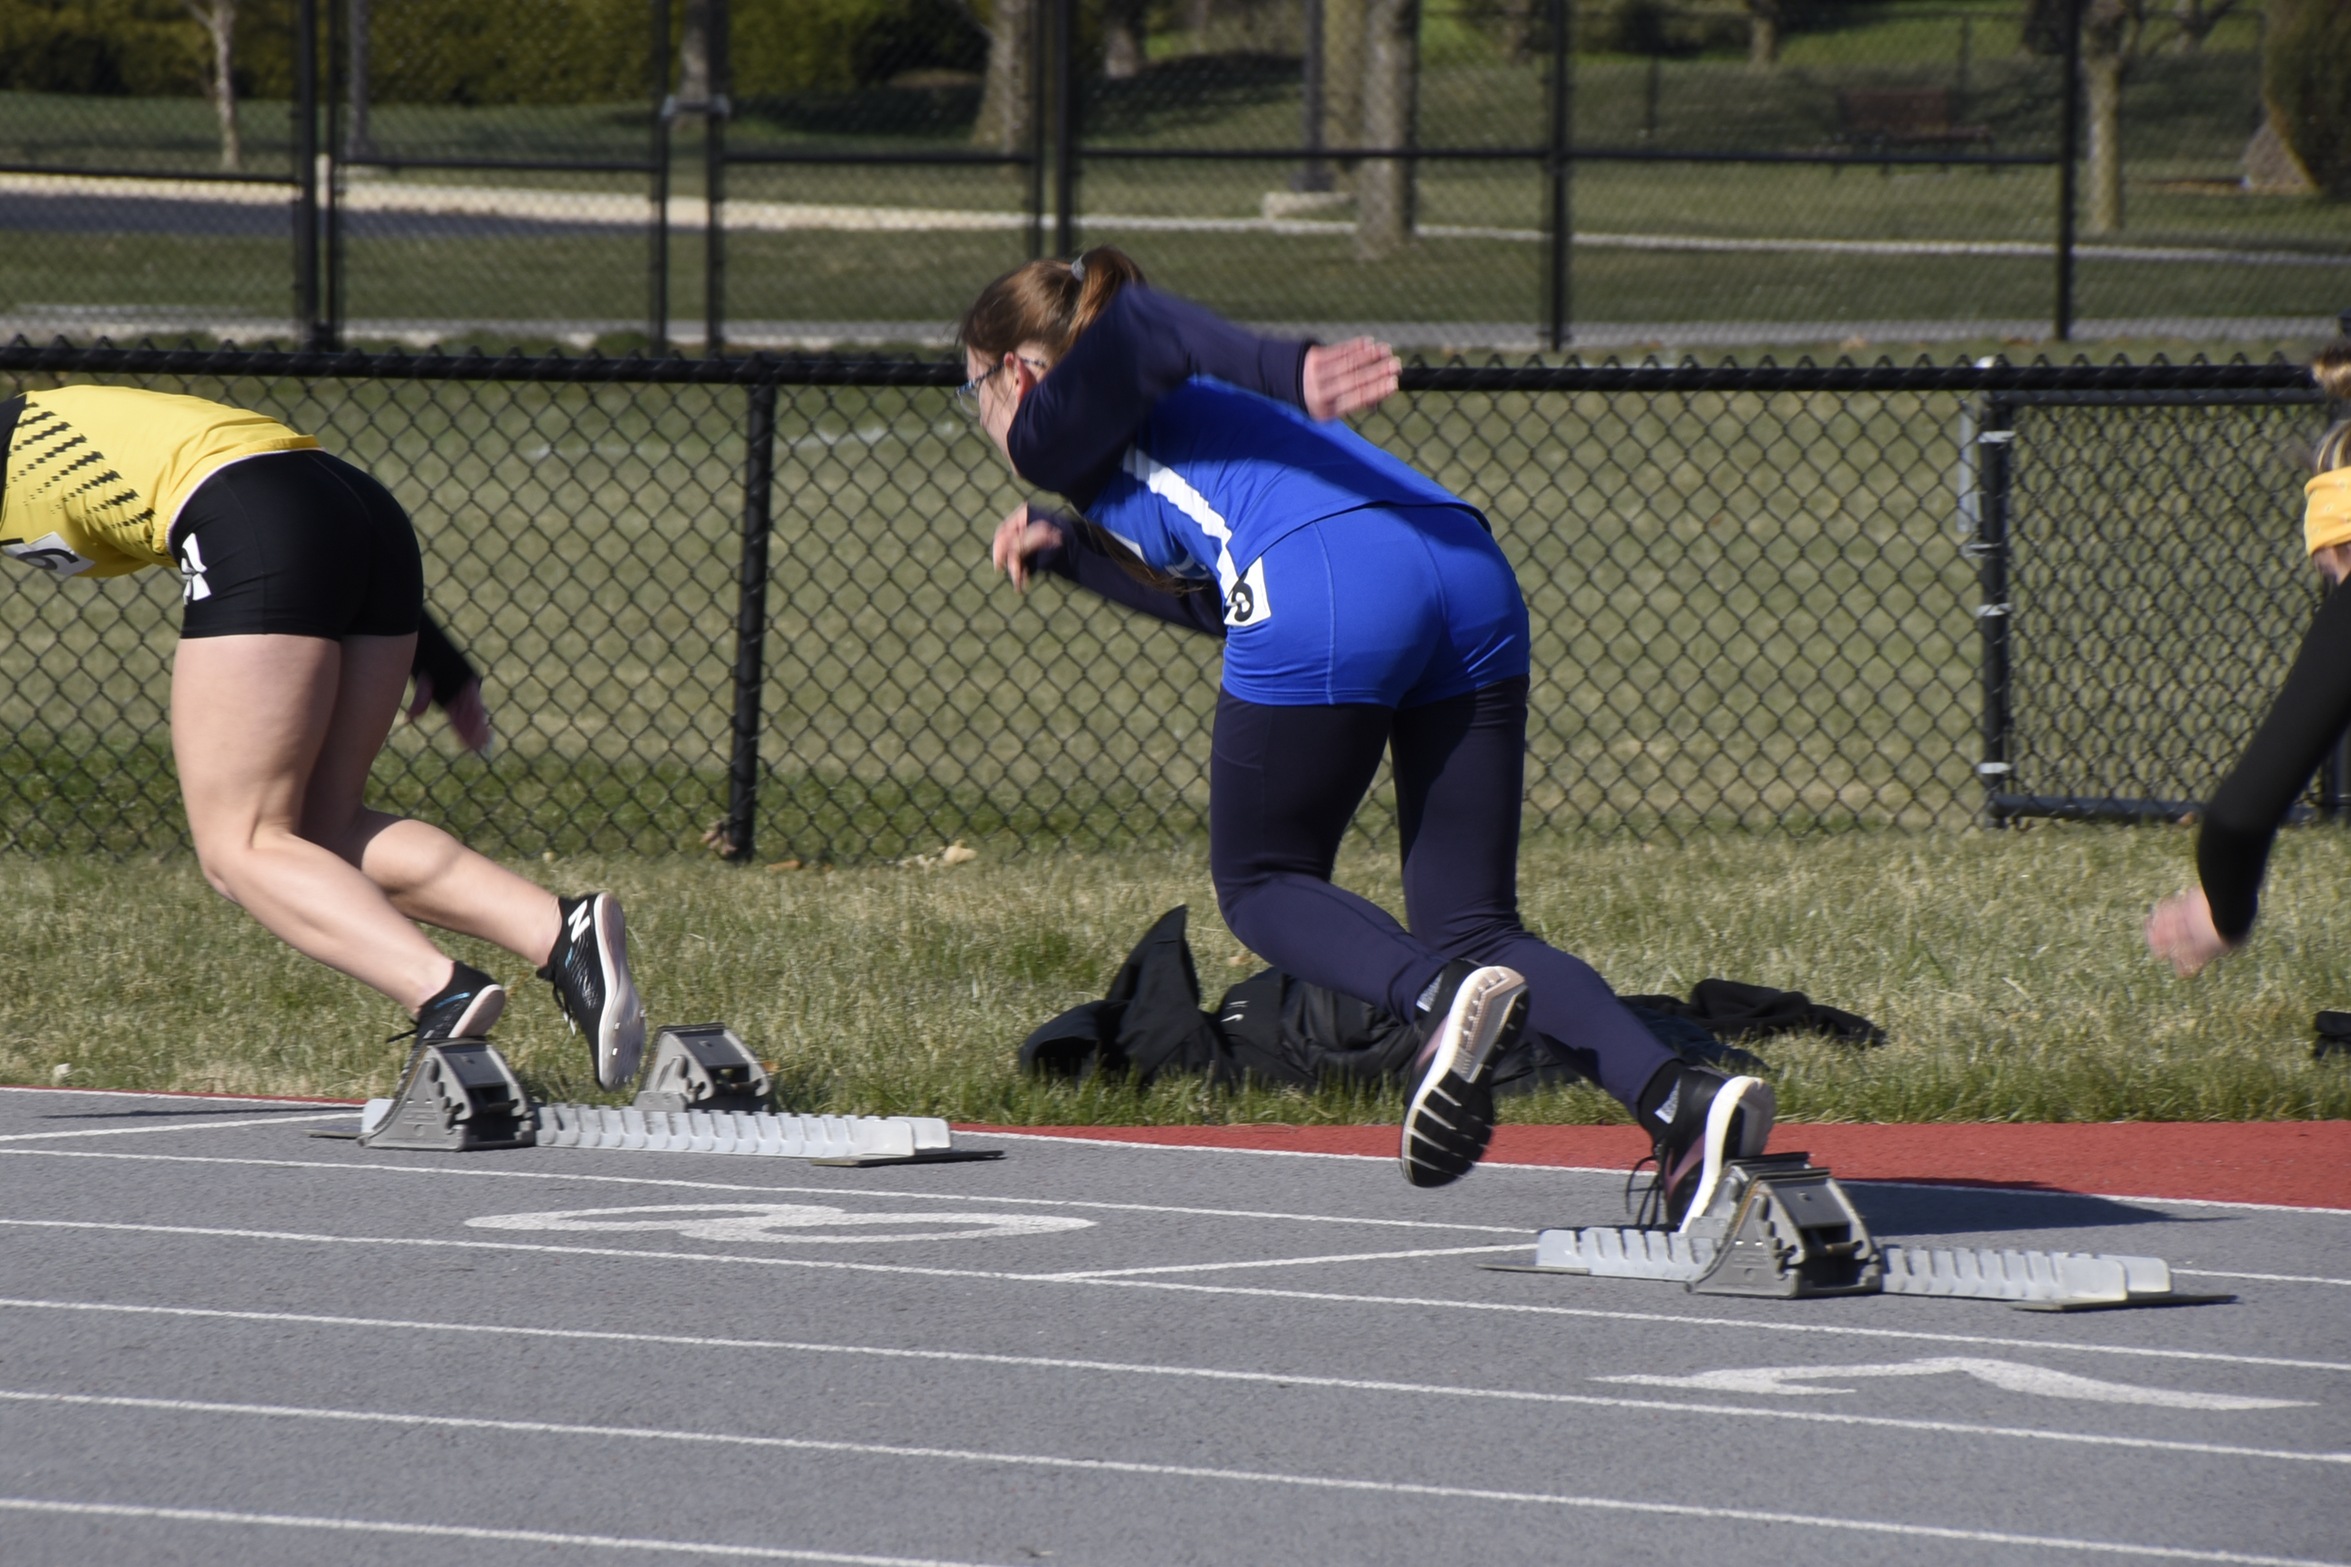 Personal Bests Continue at Manchester Invitational